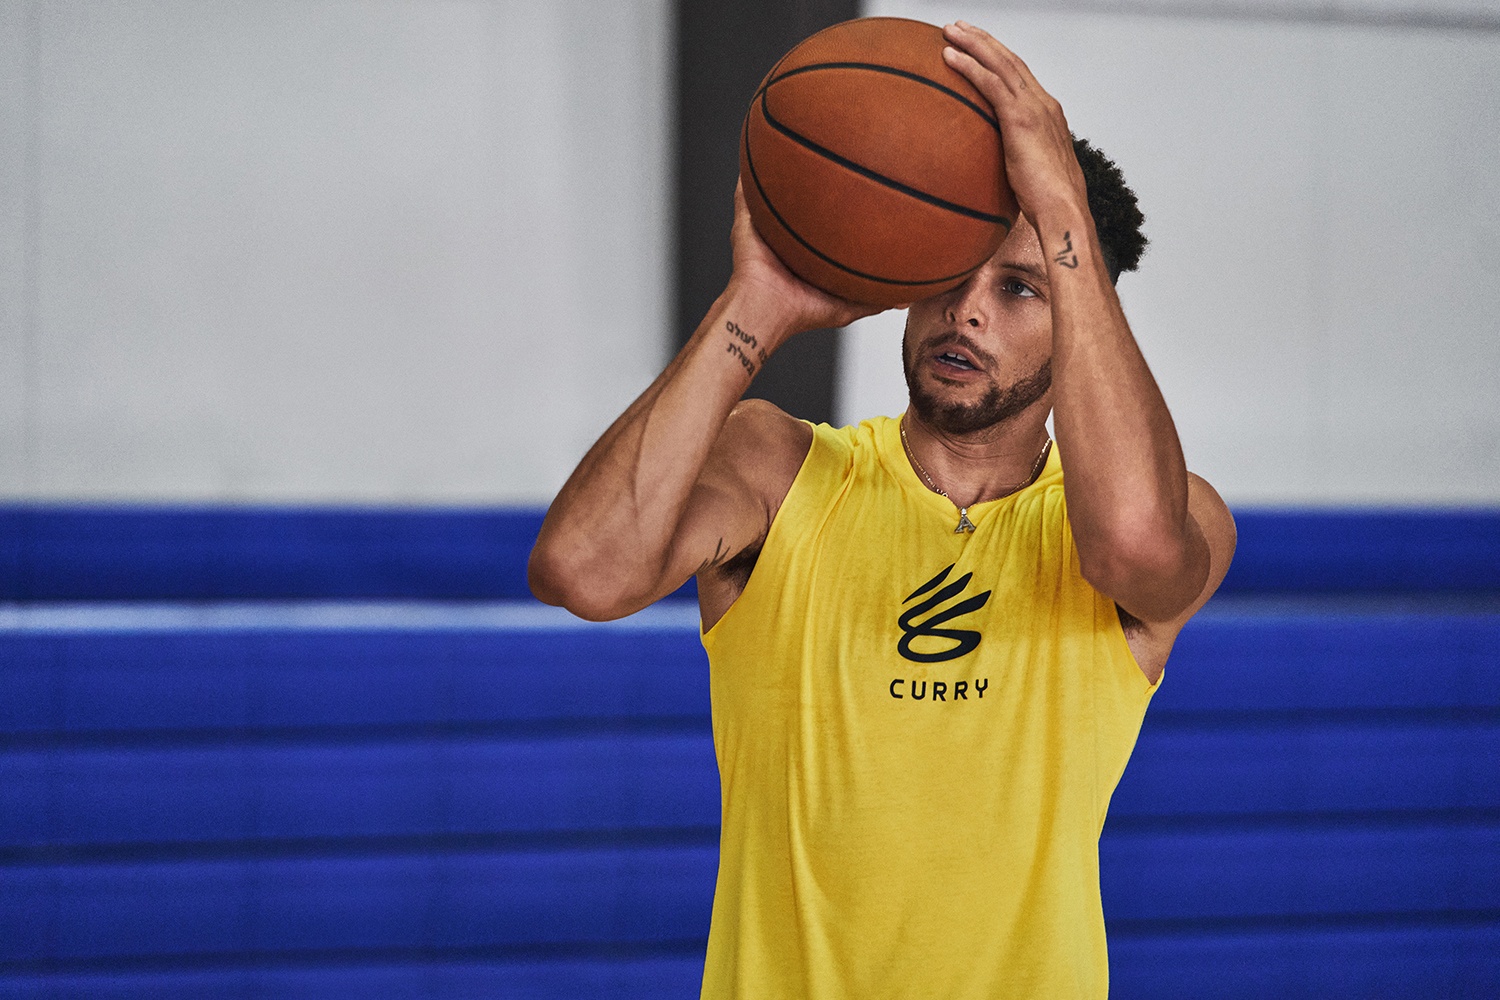 woonadres Oranje Nuttig Under Armour launches brand with NBA star Steph Curry to rival Nike's Jordan